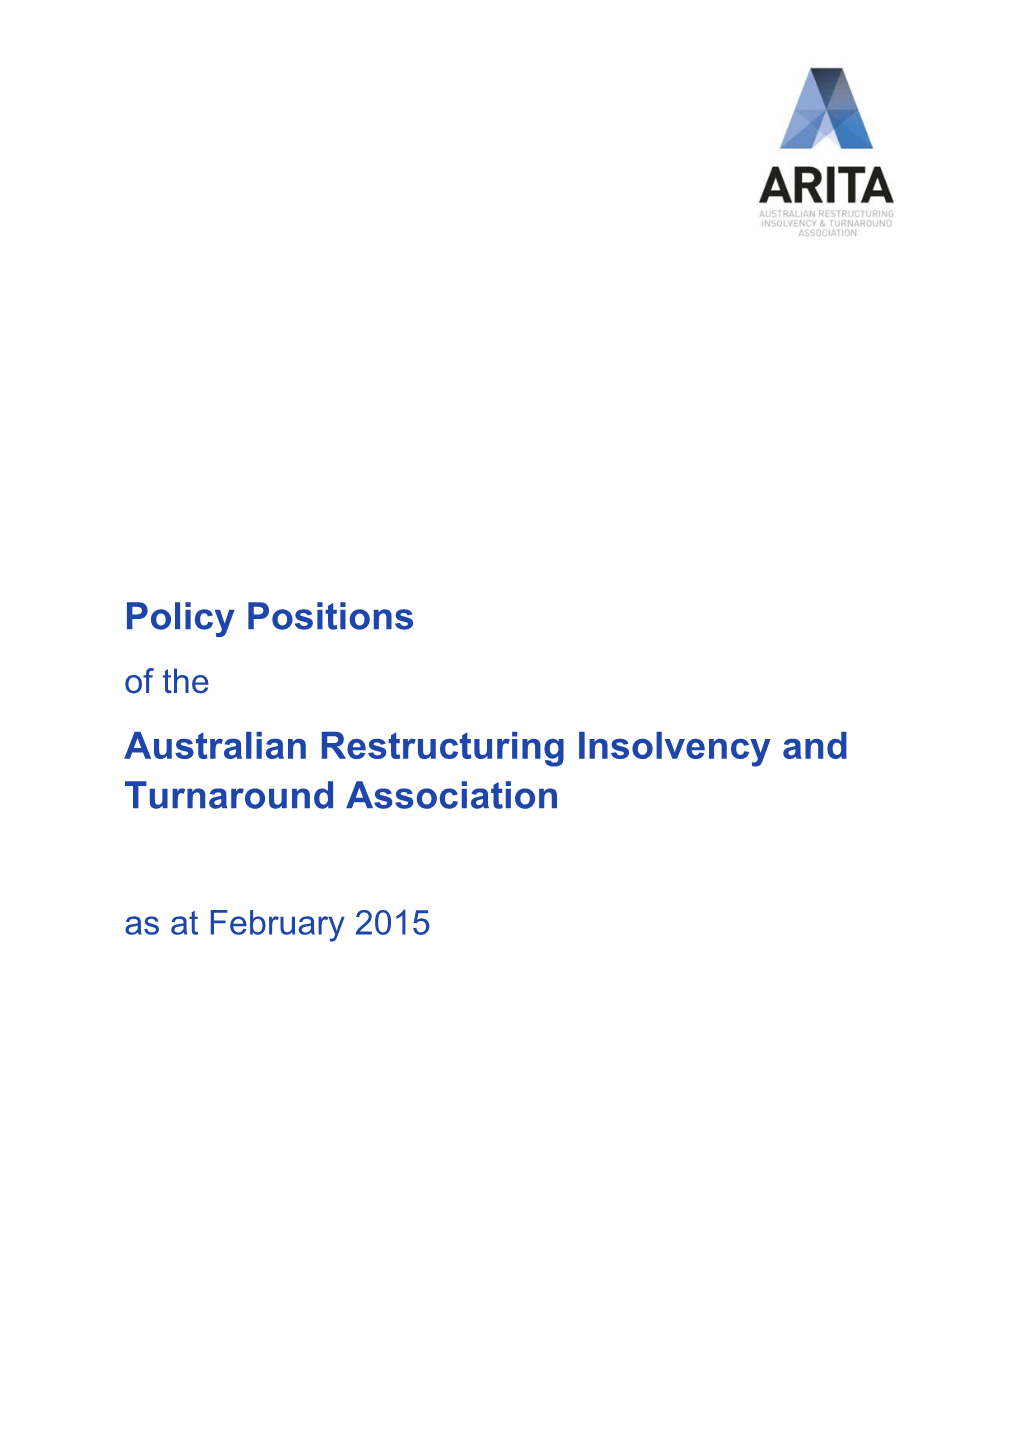 Submission 31 - Attachment - Australian Restructuring Insolvency & Turnaround Association